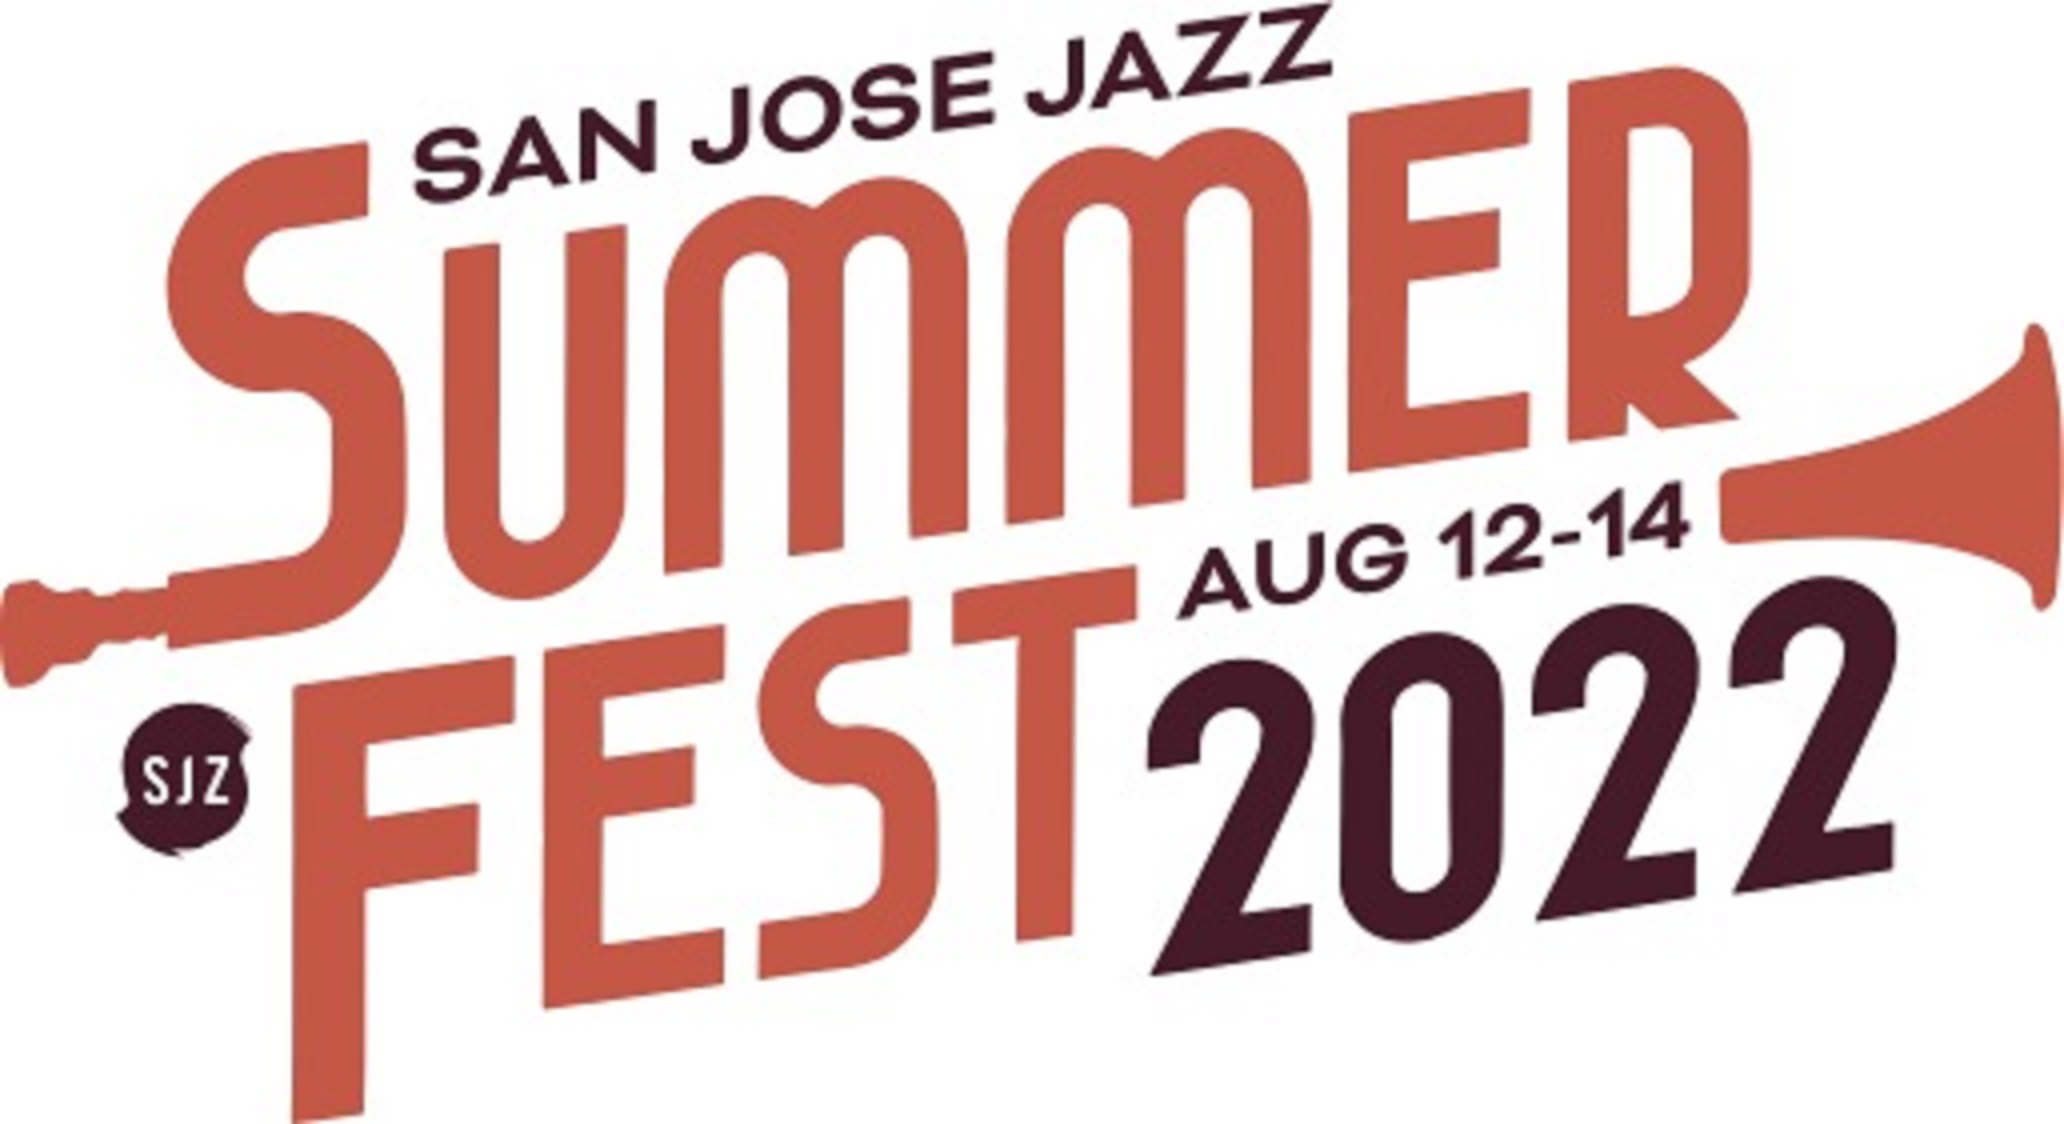 Downtown San Jose Is The Place To Be With 12 Stages of Live Music from August 12 - 14